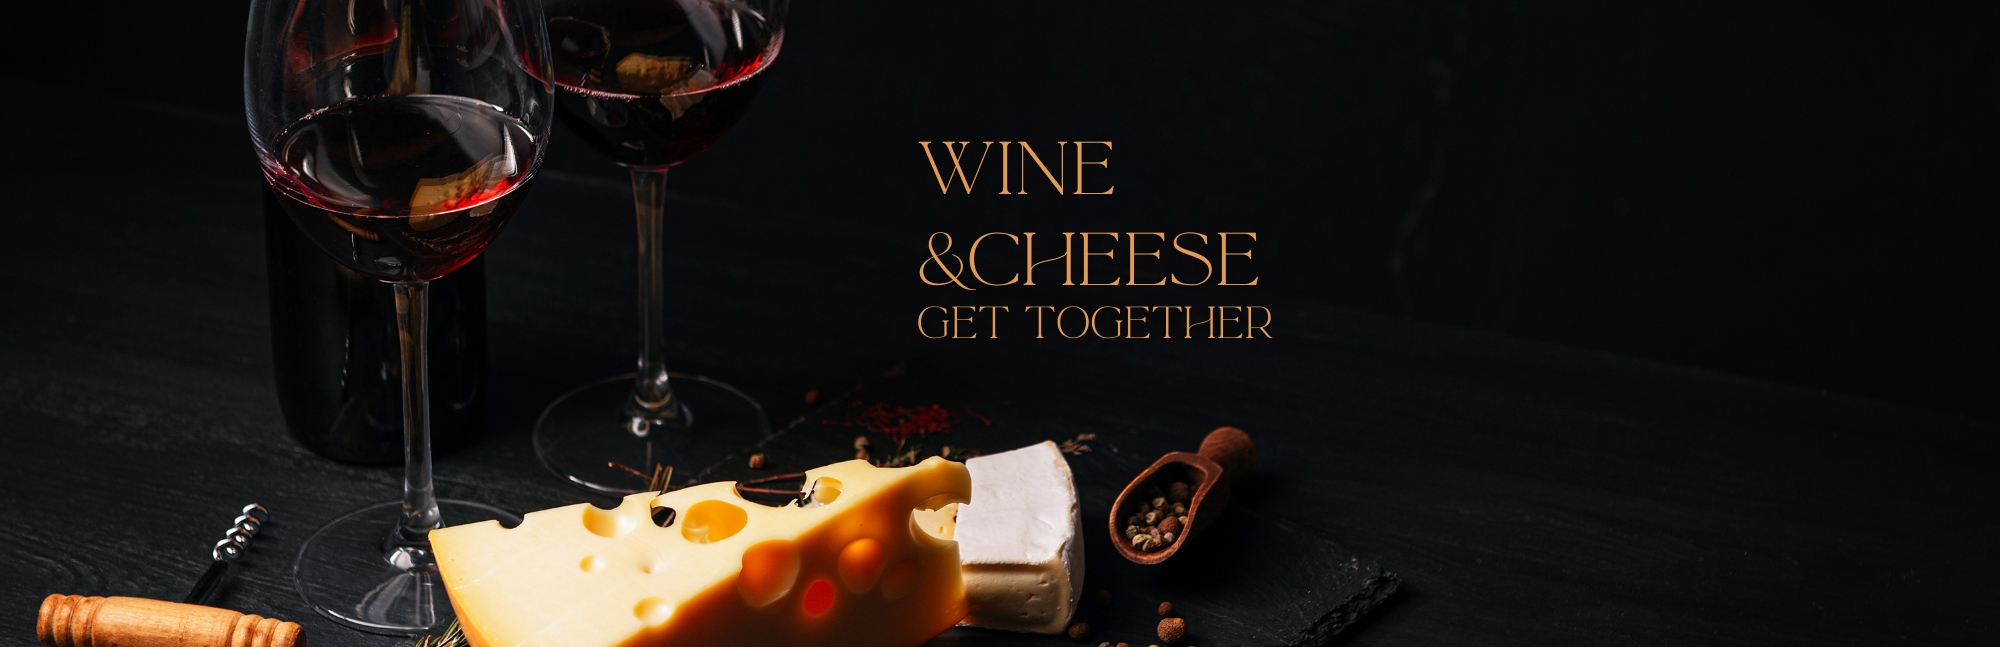 Wine&Cheese Get Together- Coming Soon